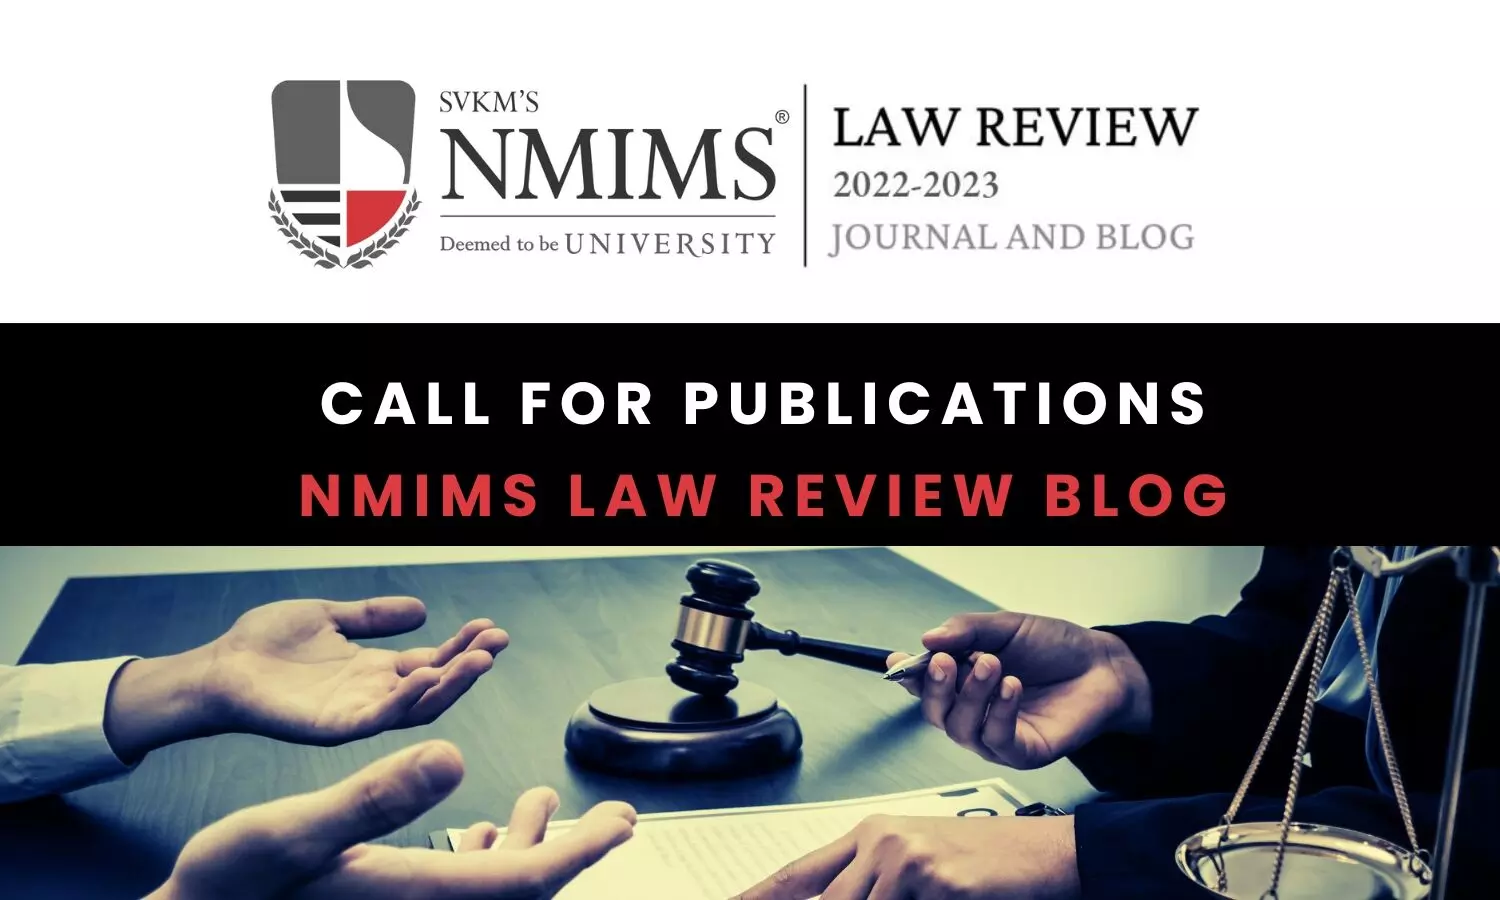 Call for Publications The NMIMS Law Review Blog  Submissions on Rolling Basis